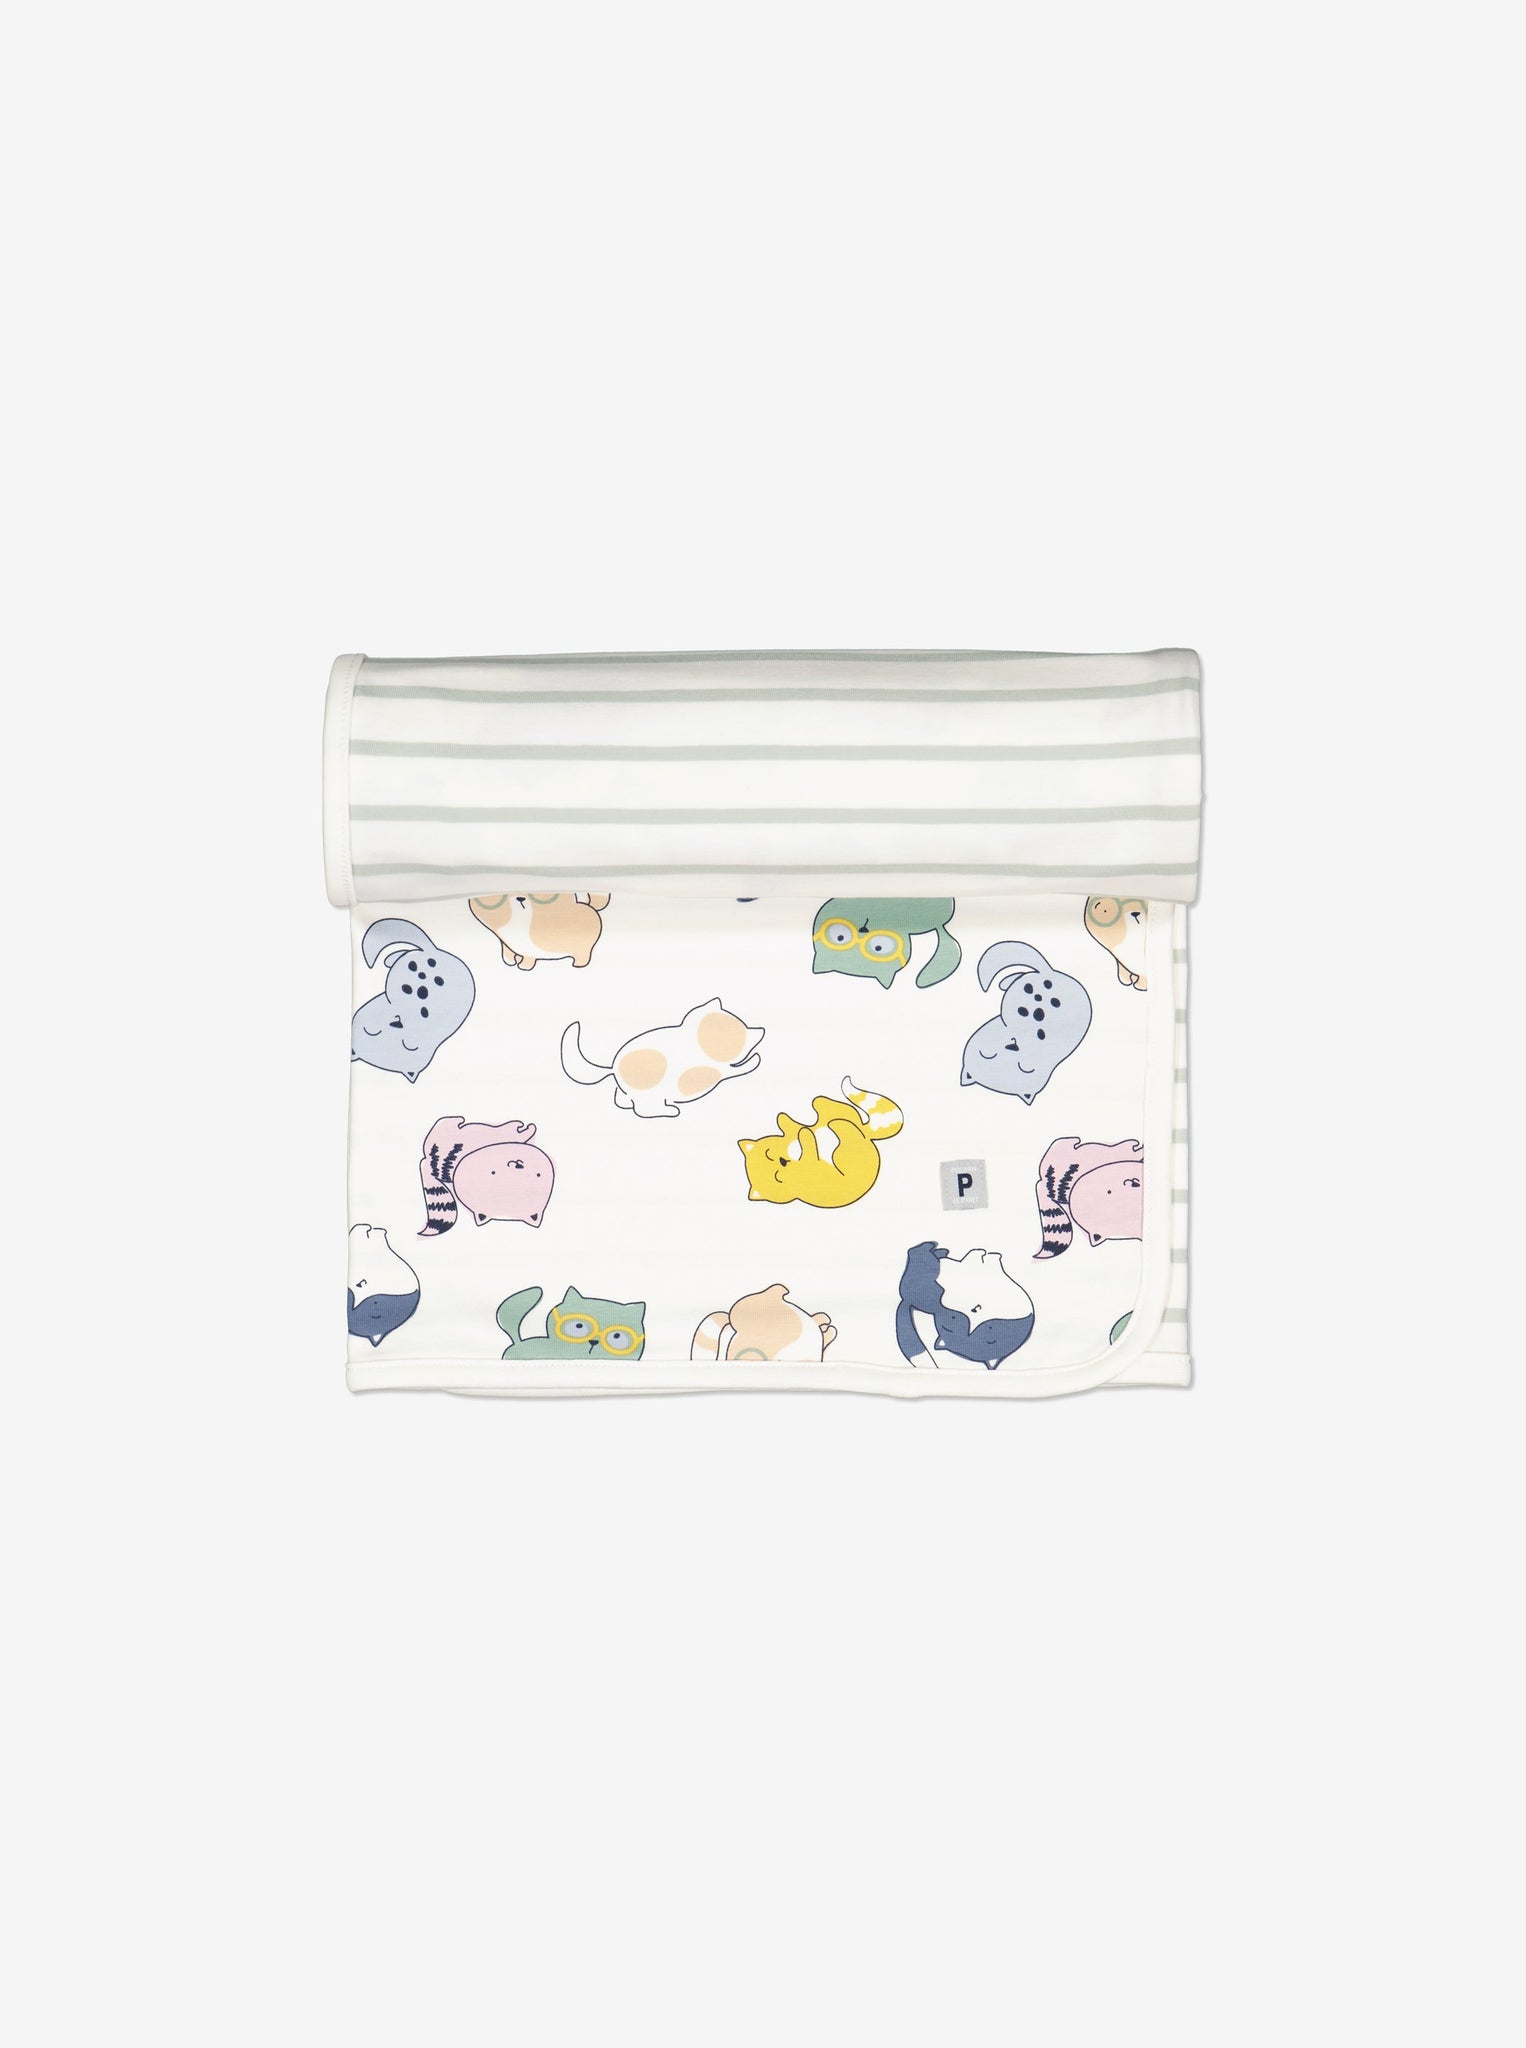  Organic Cotton White Newborn Baby Blanket from Polarn O. Pyret Kidswear. Made from environmentally friendly materials.